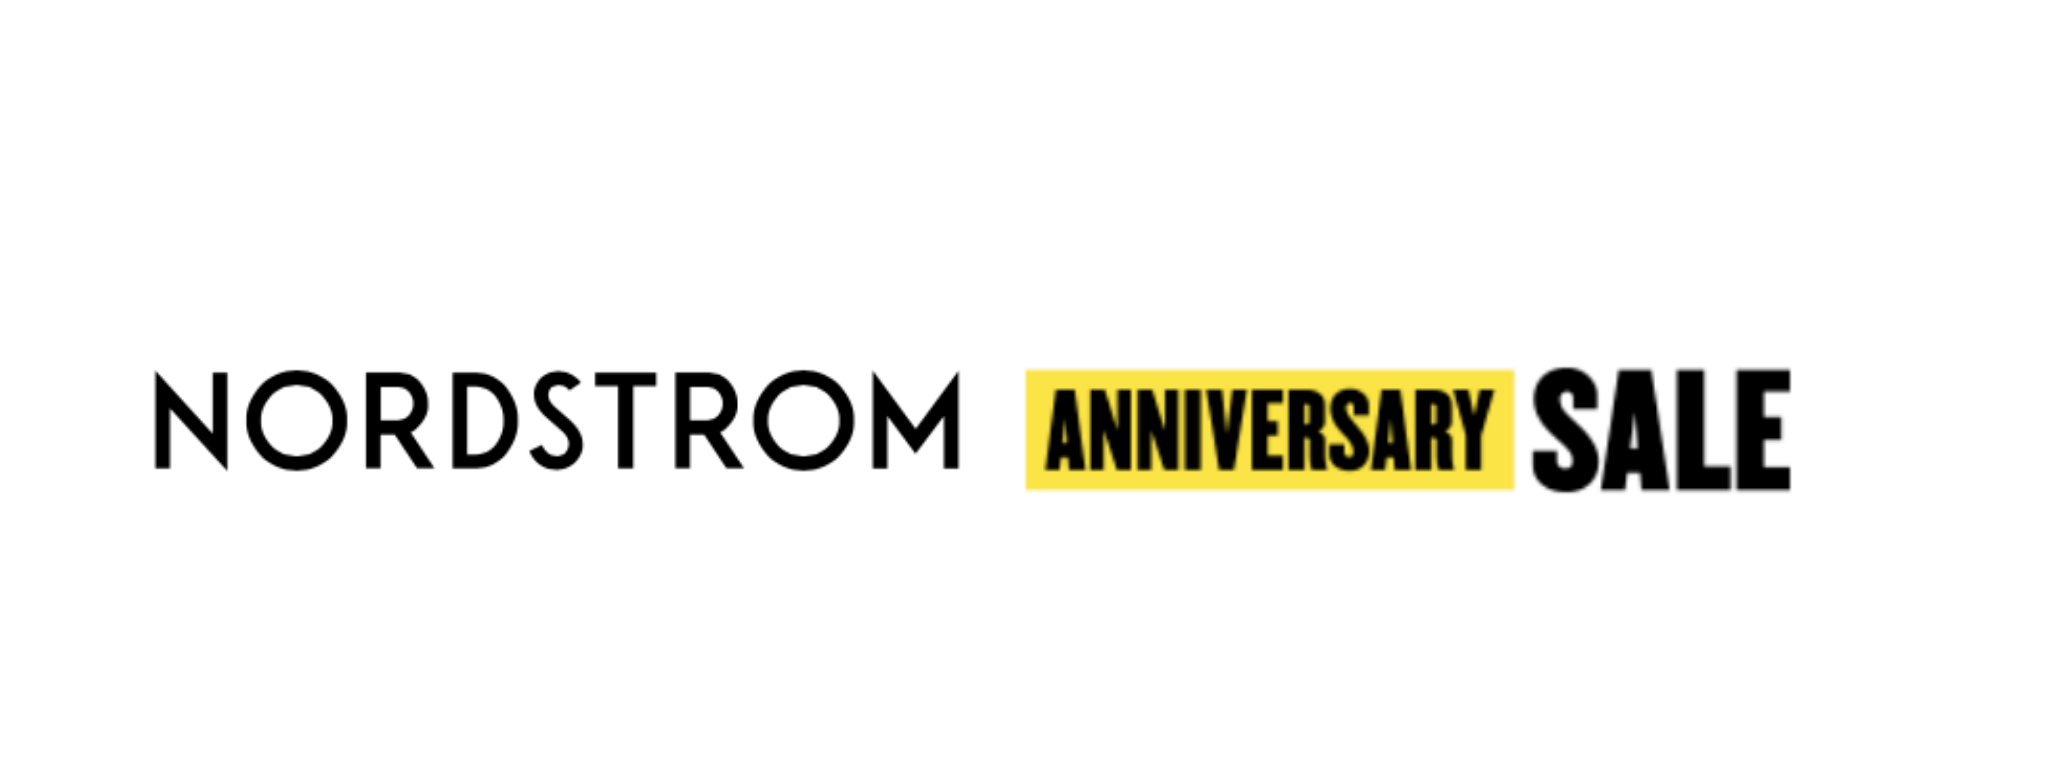 Hurry! These Amazing Nordstrom Anniversary Sale Home Deals End Tonight